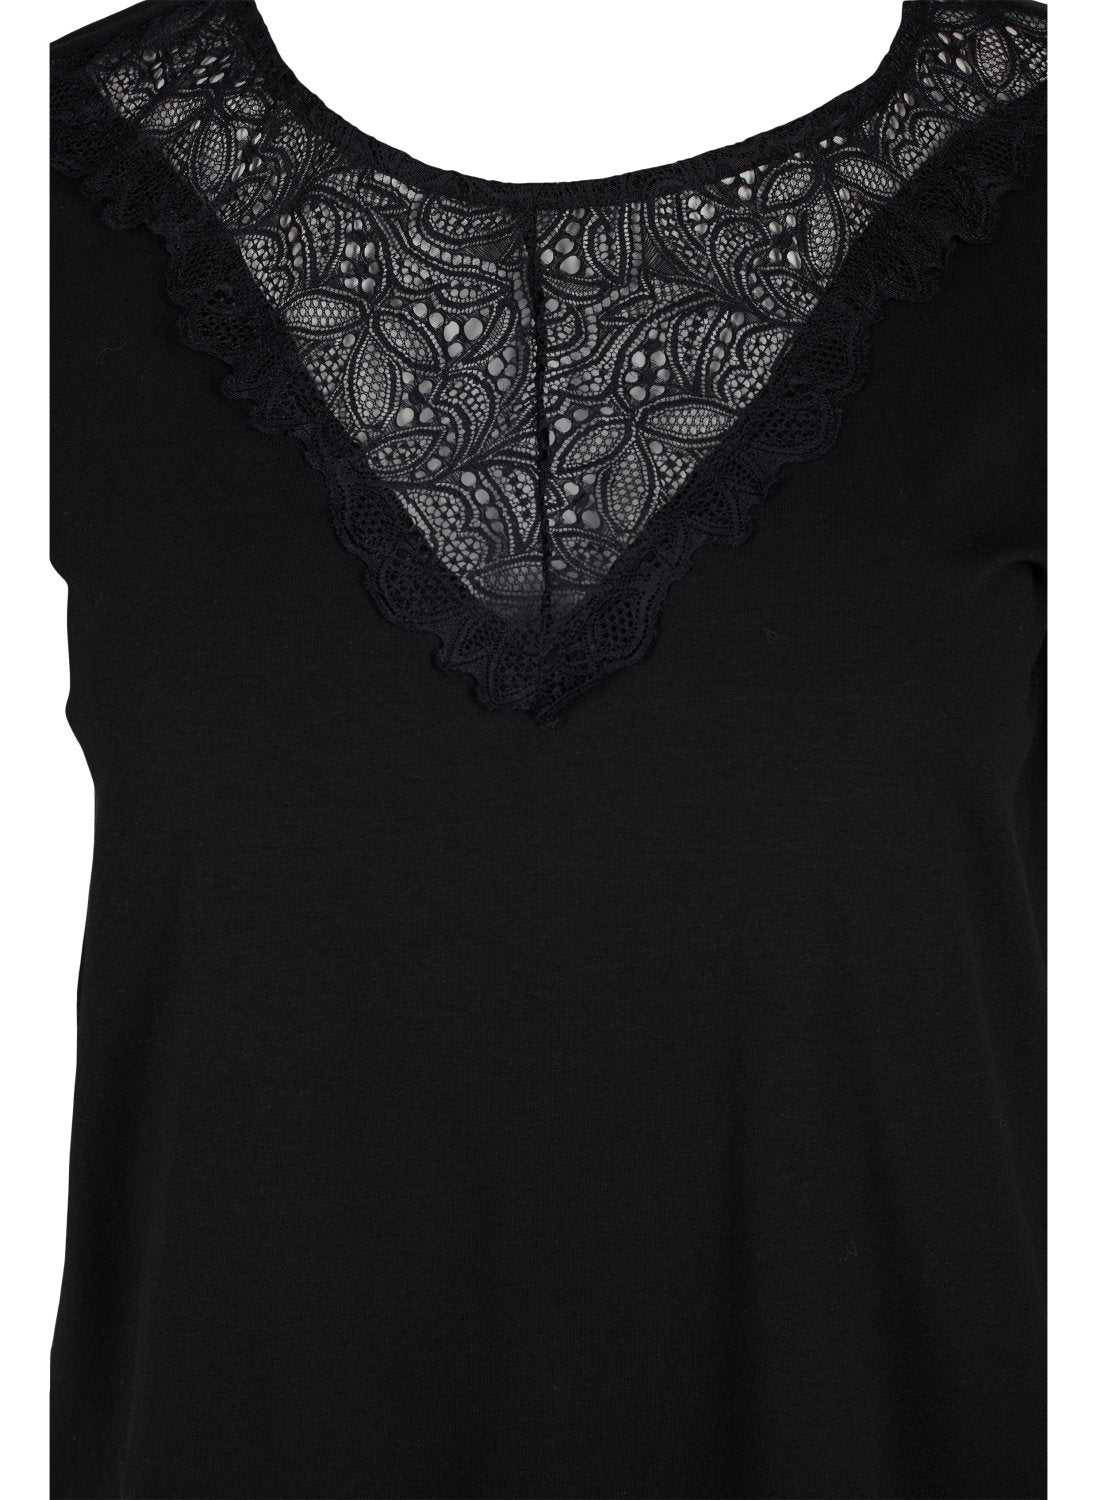 Carly lace Top